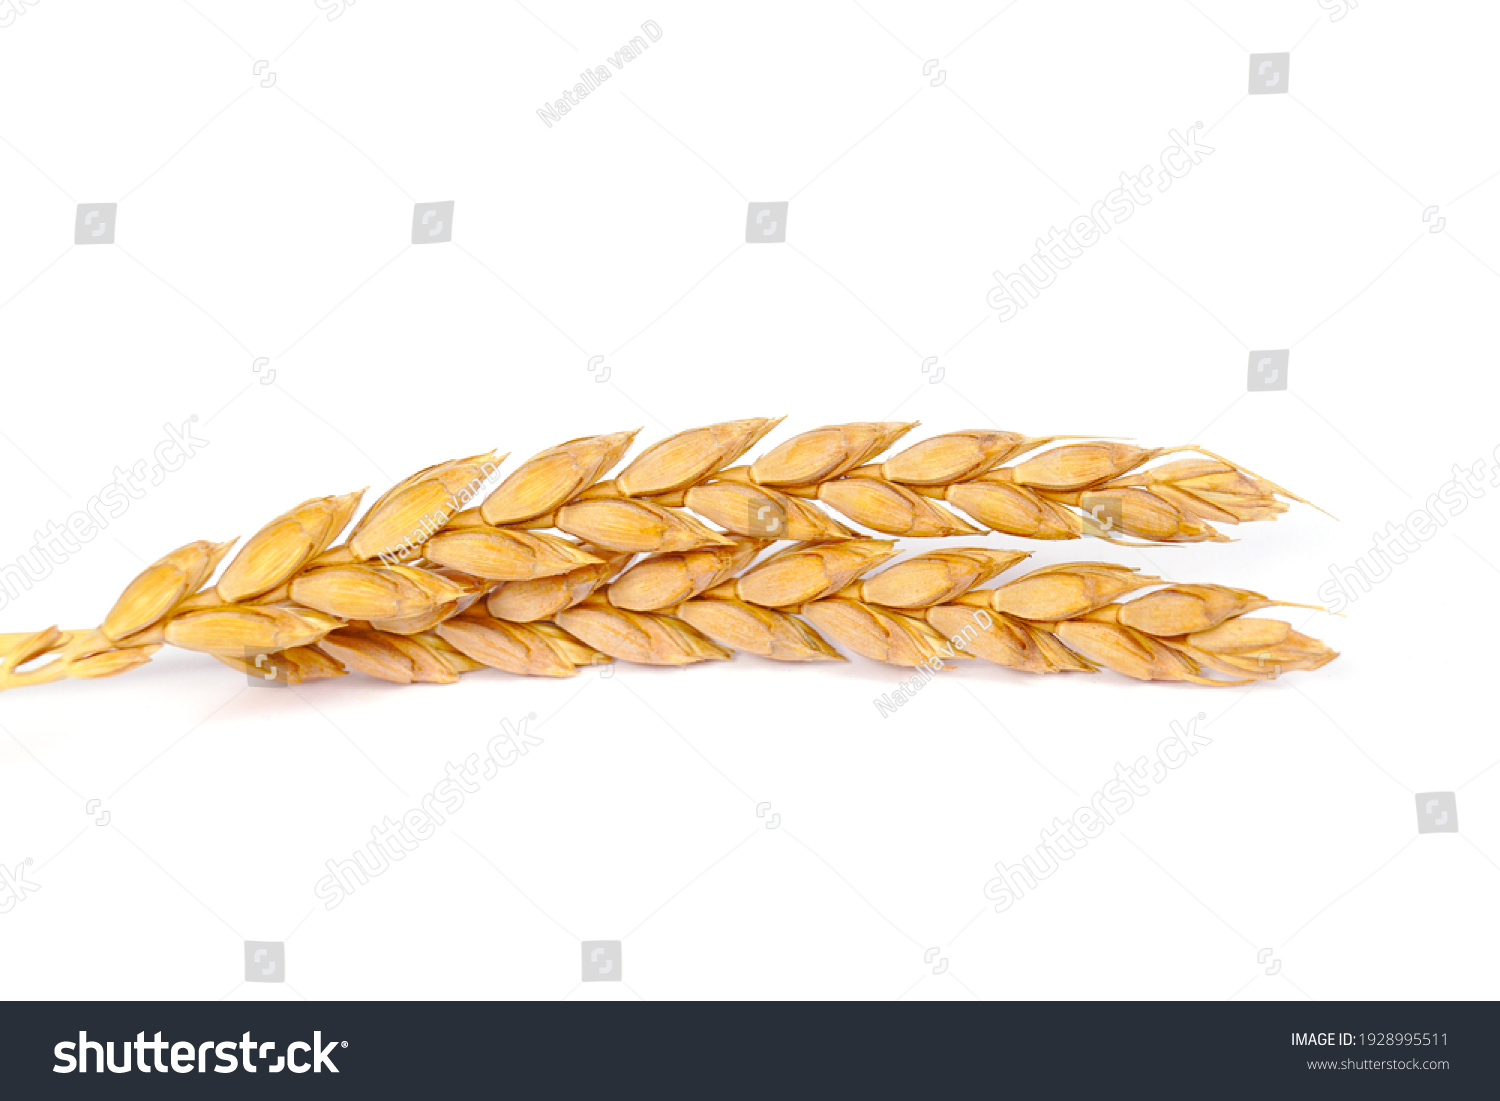 a bright closeup of a bunch of golden ripe dinkel hulled wheat Spelt Spelt (Triticum spelta dicoccum) rye grain relict crop health food ready for harvest isolated on white #1928995511